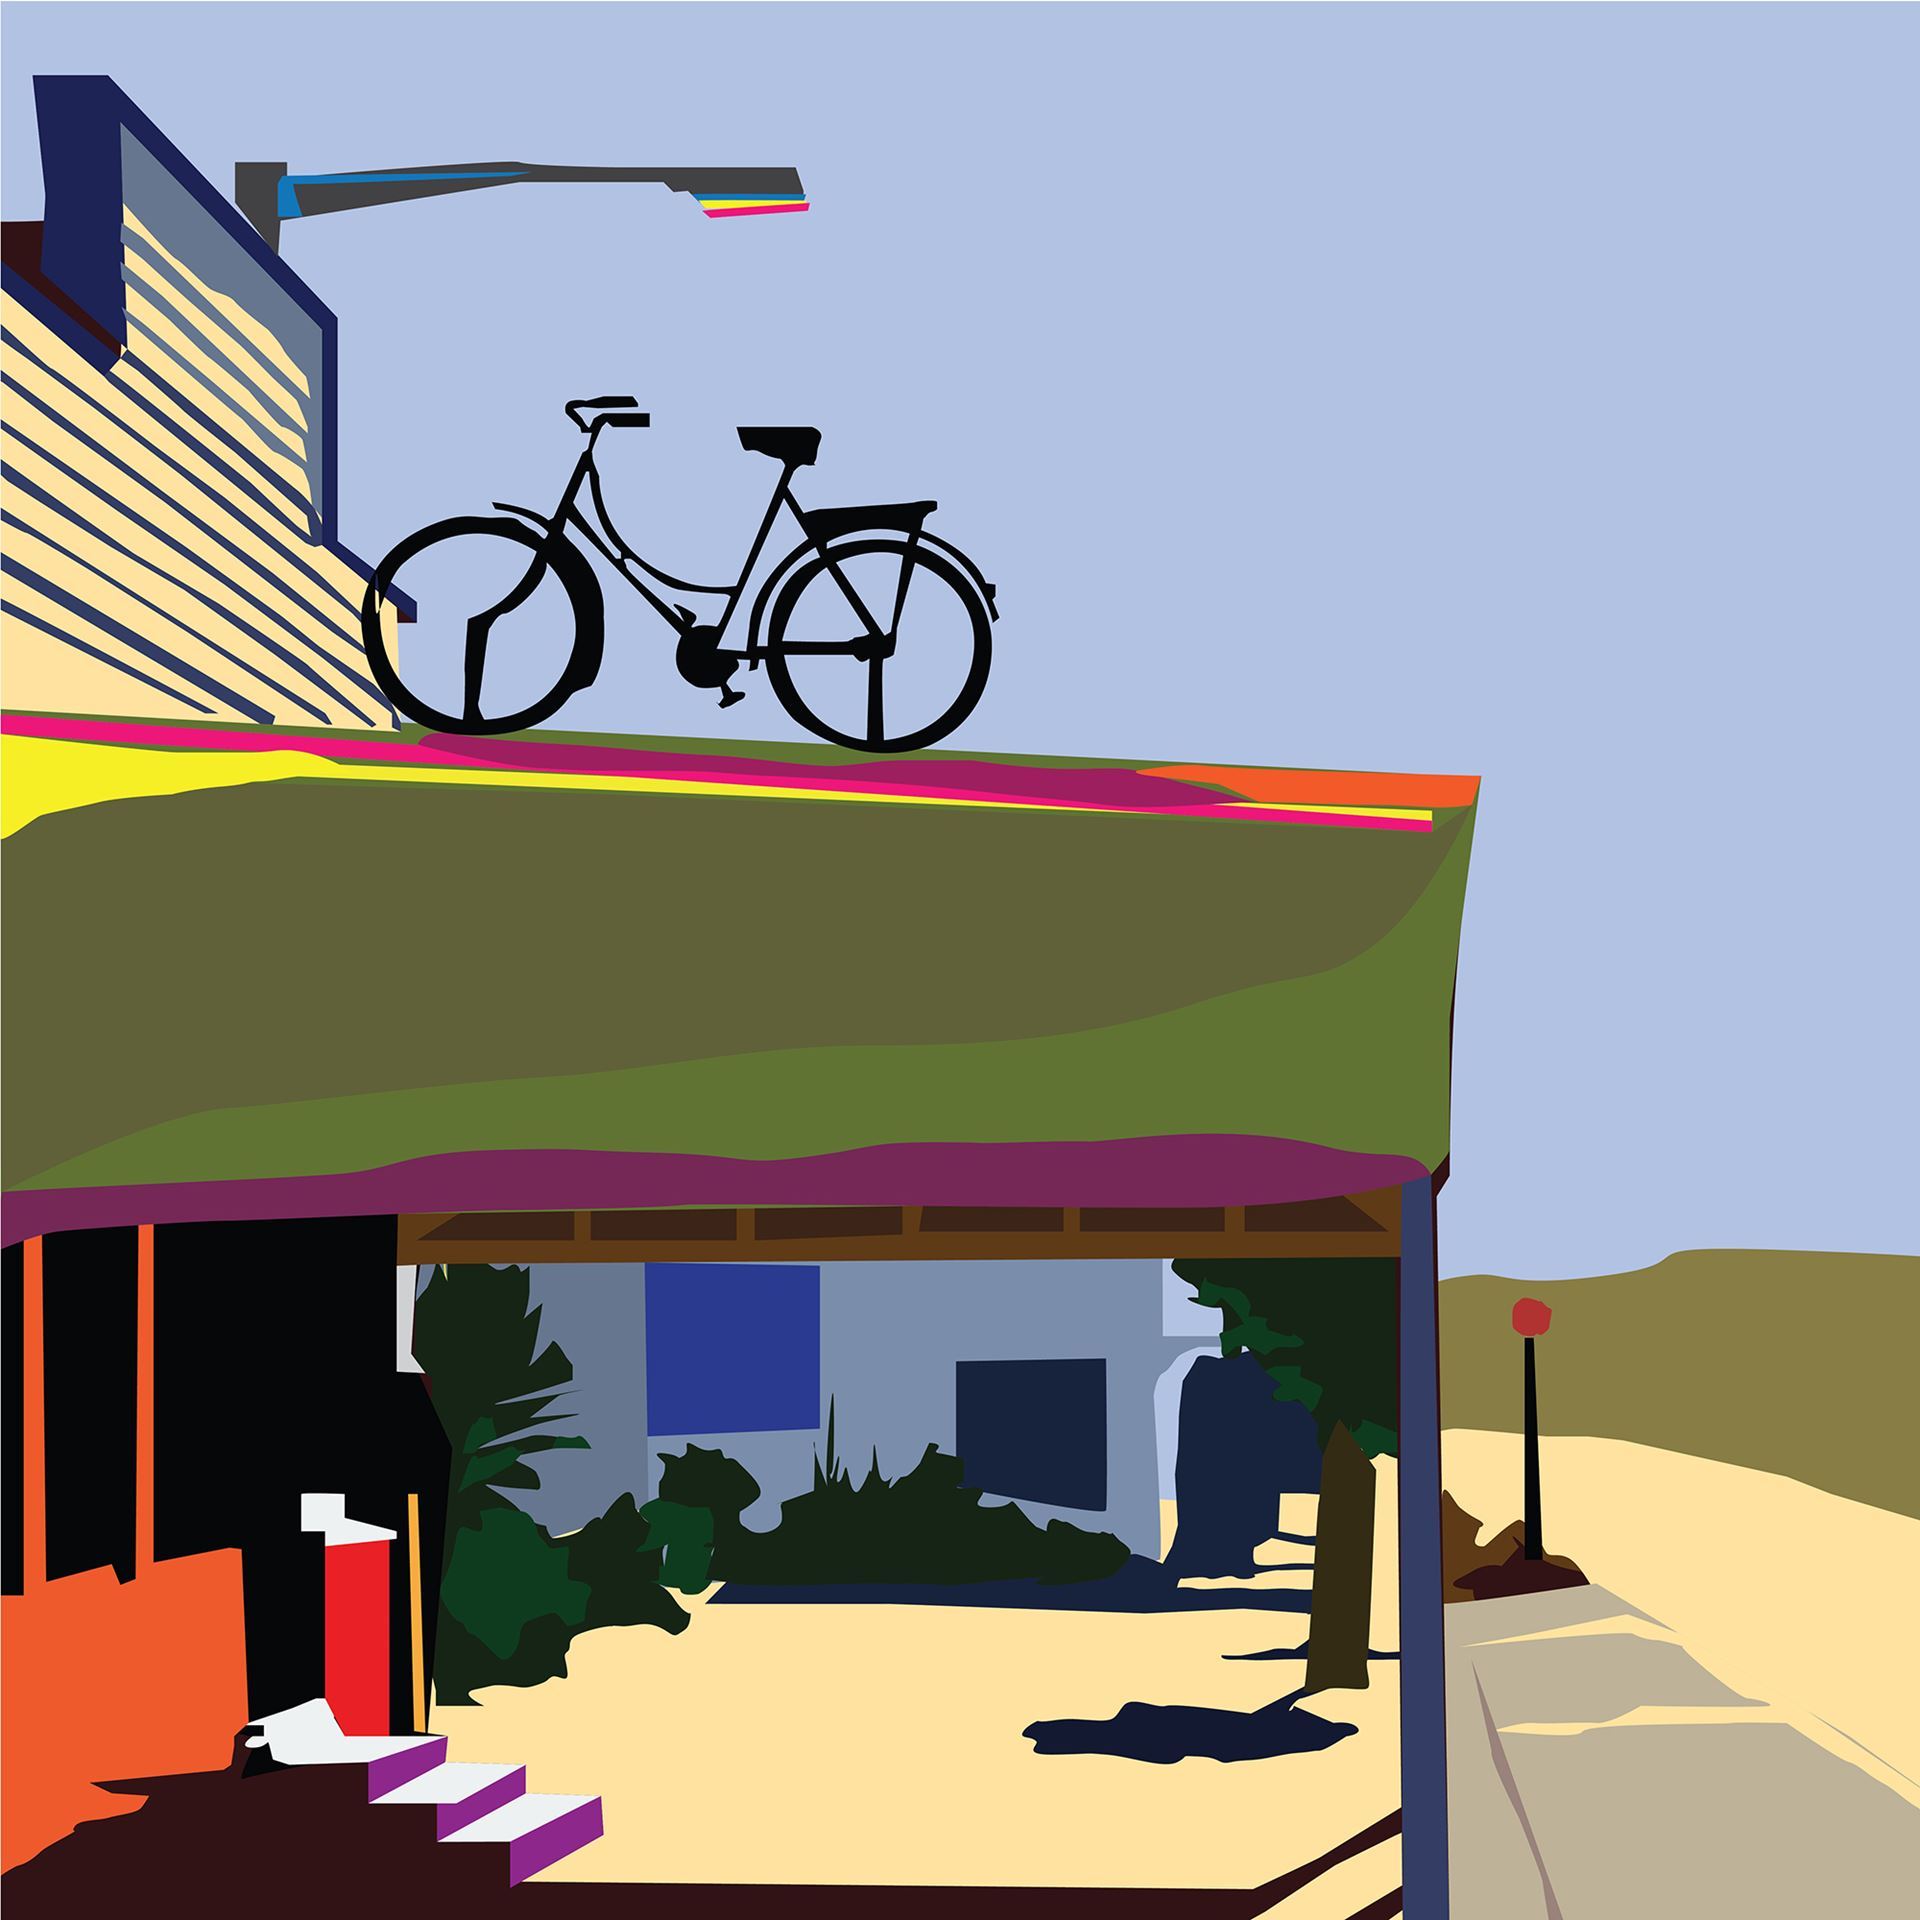 Digital illustration, "BikeShop" by Laura Manney. Brightly-colored side view of a bike shop with simplified vector shapes.